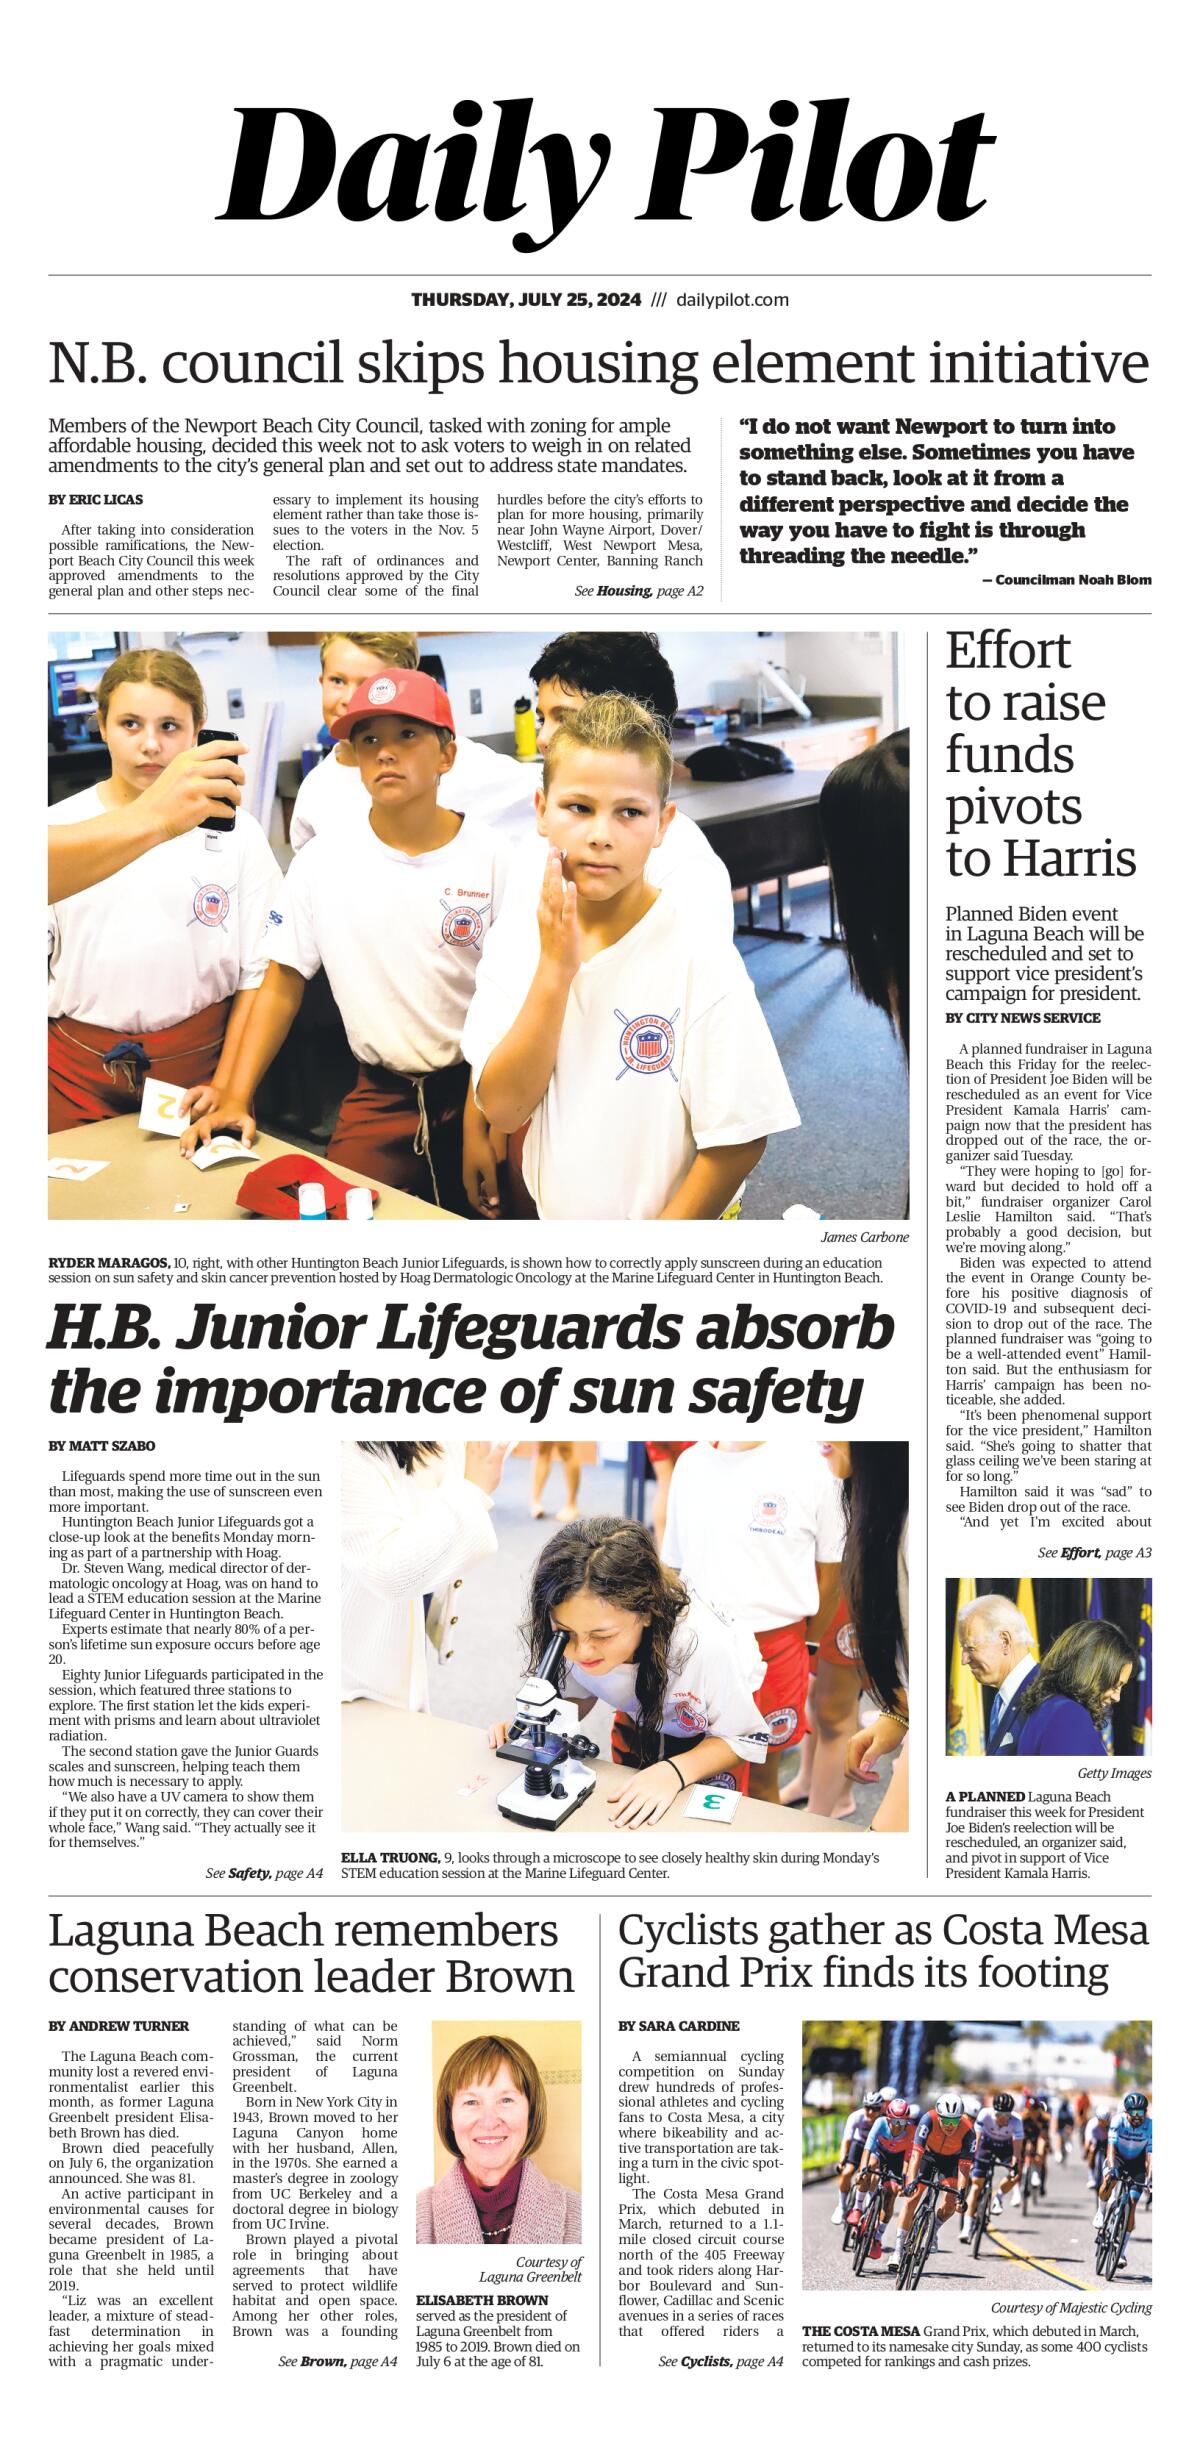 Front page of the Daily Pilot e-newspaper for Thursday, July 25, 2024.